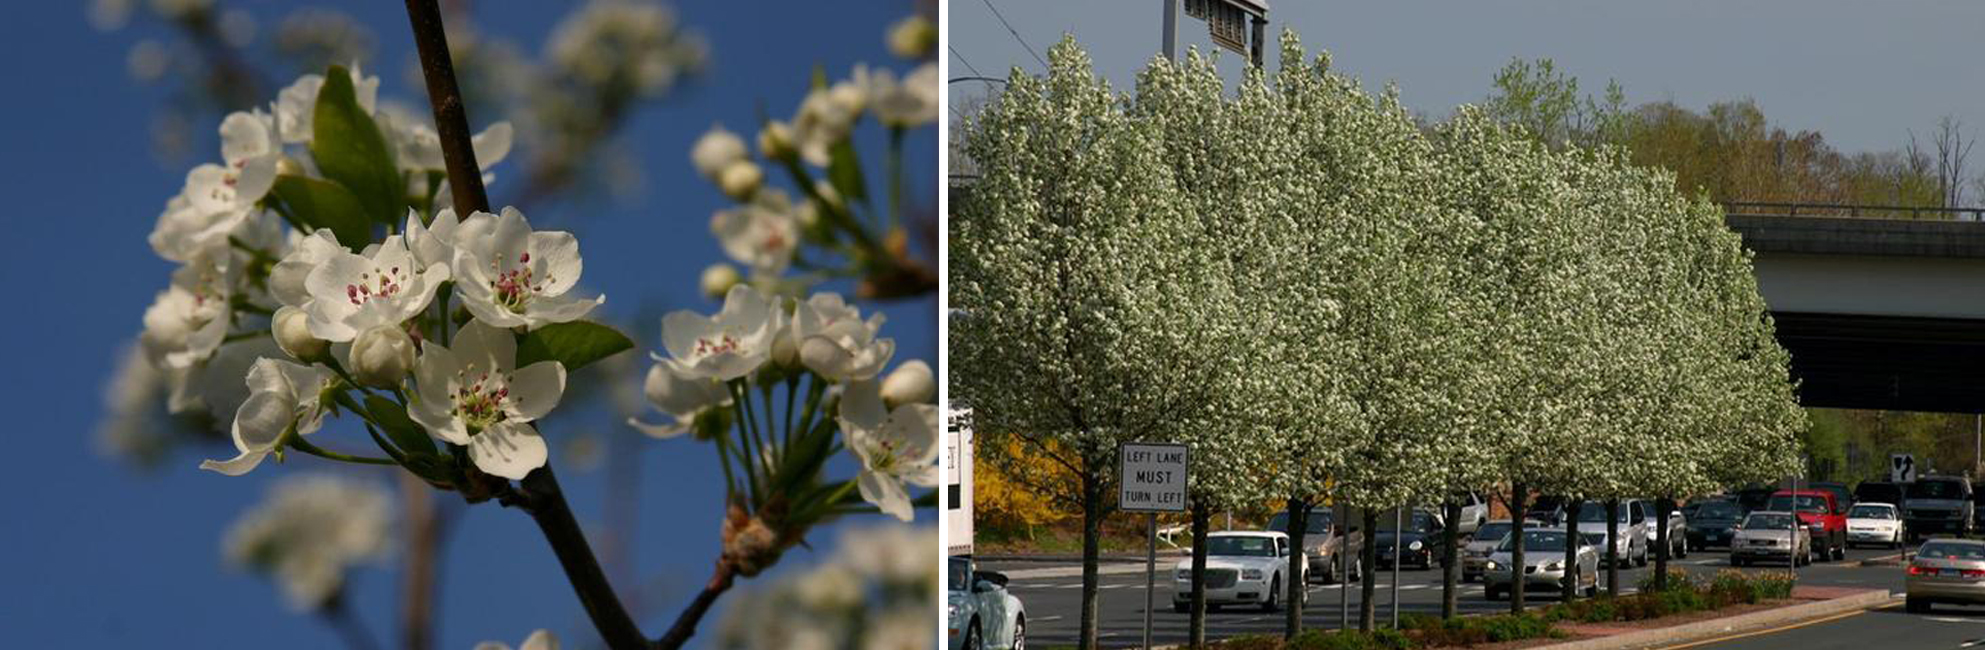 composite image of a flower pear bloom close up and a row of blooming pear trees along a road